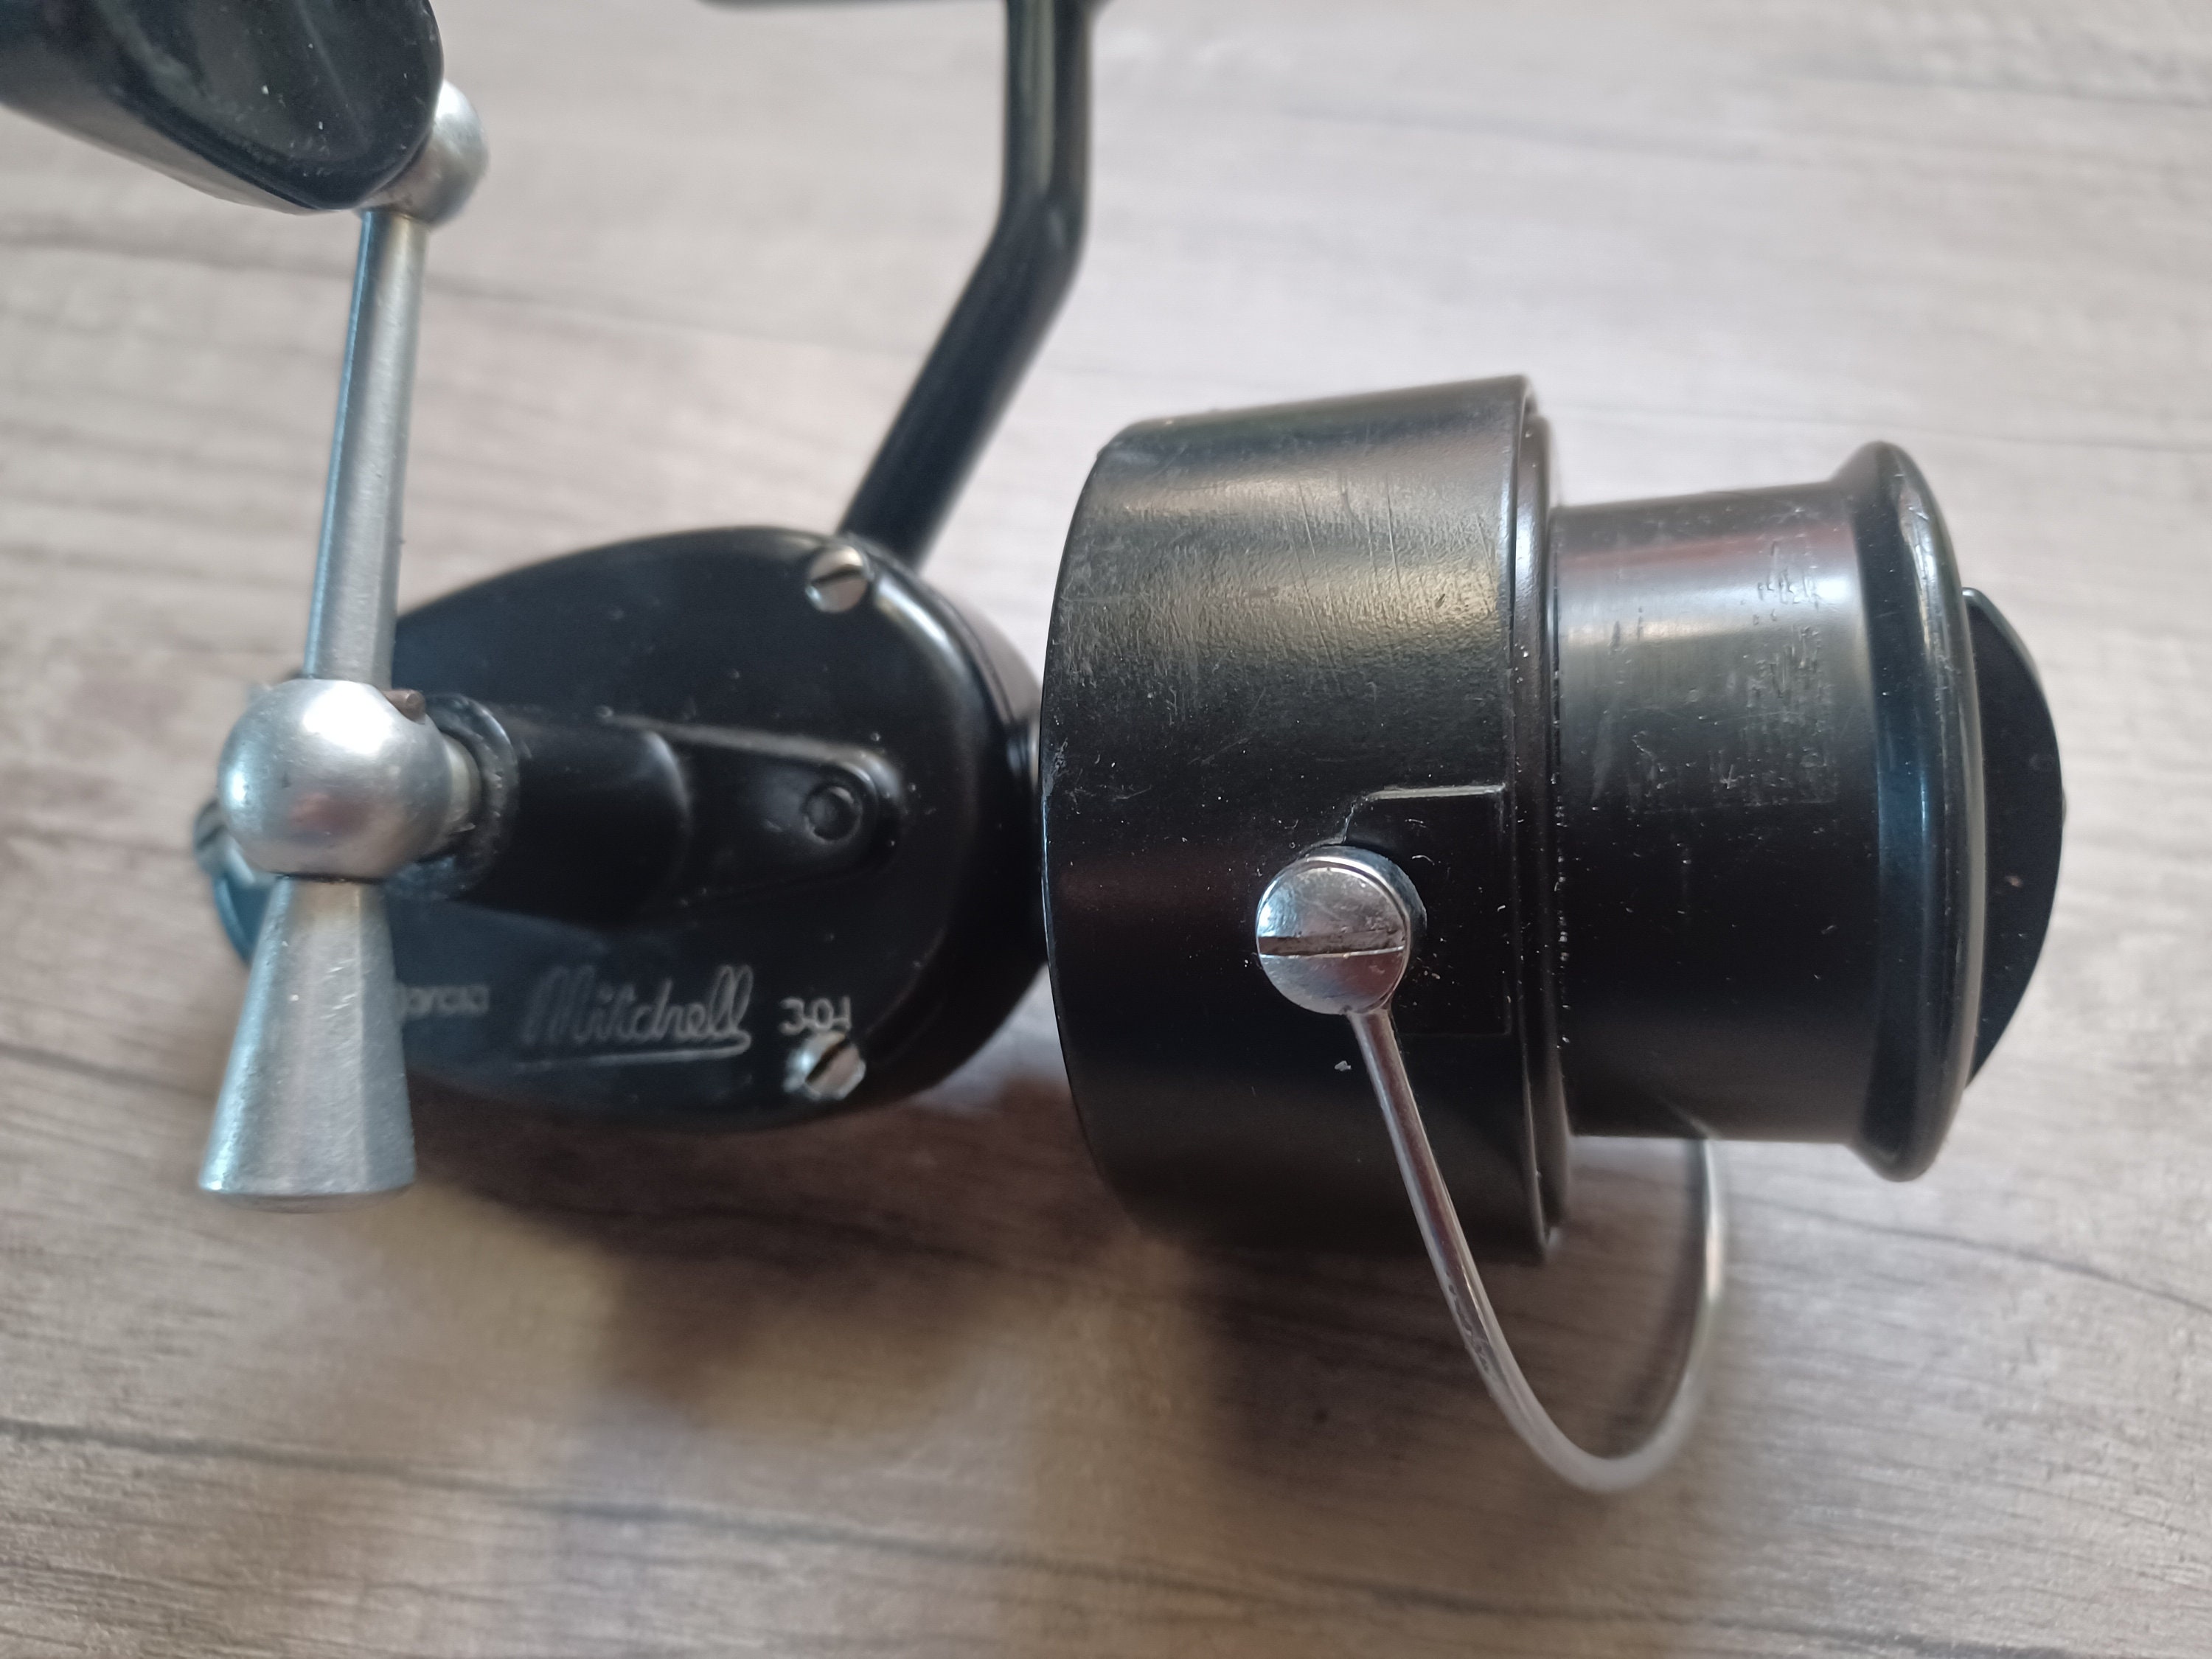 An Excellent Vintage Mitchell 301 Fixed Spool Spinning Reel for